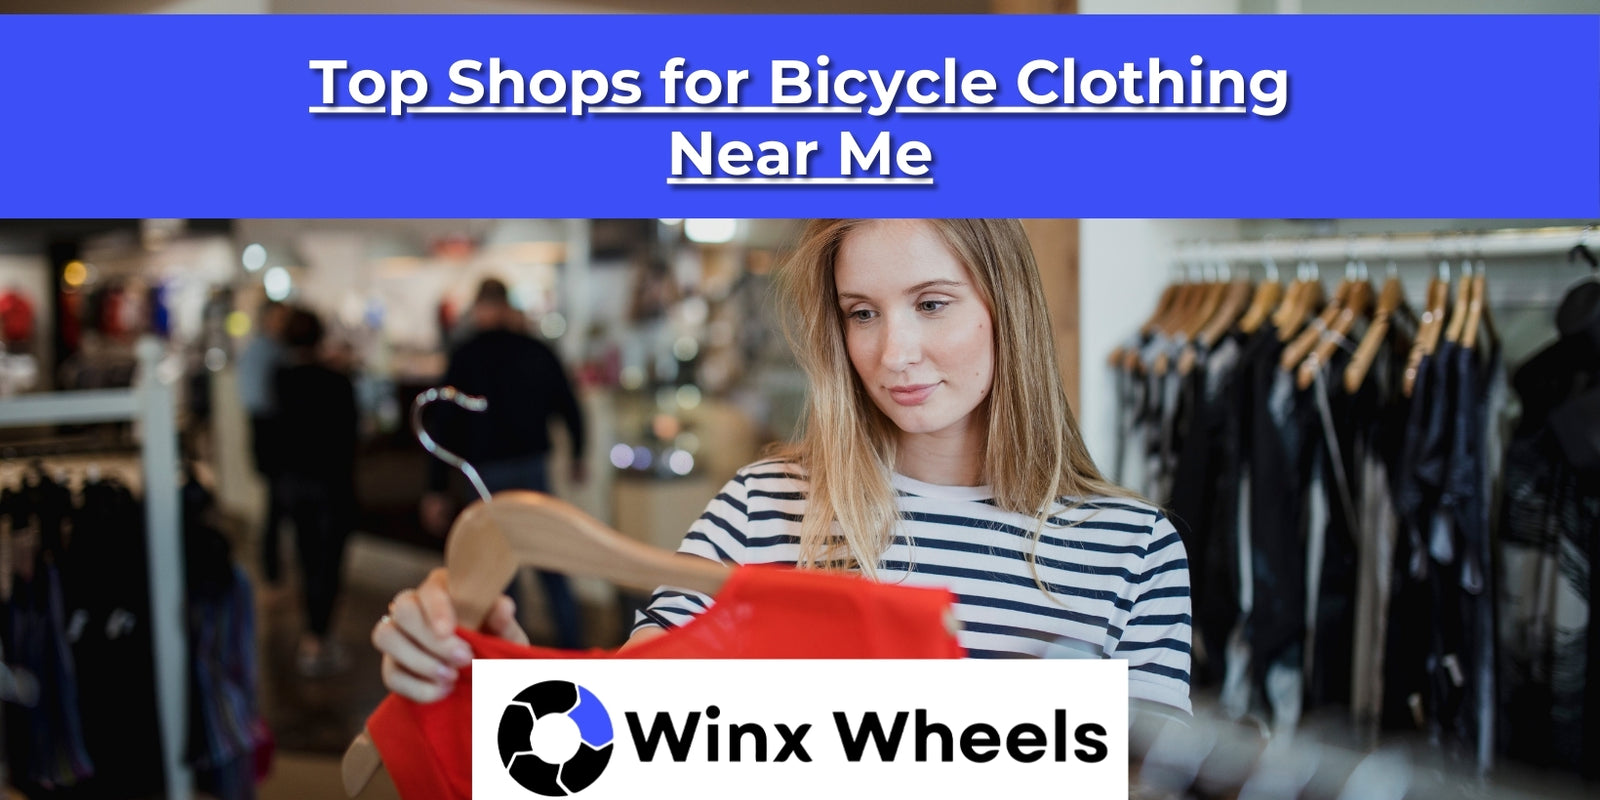 Top Shops for Bicycle Clothing Near Me